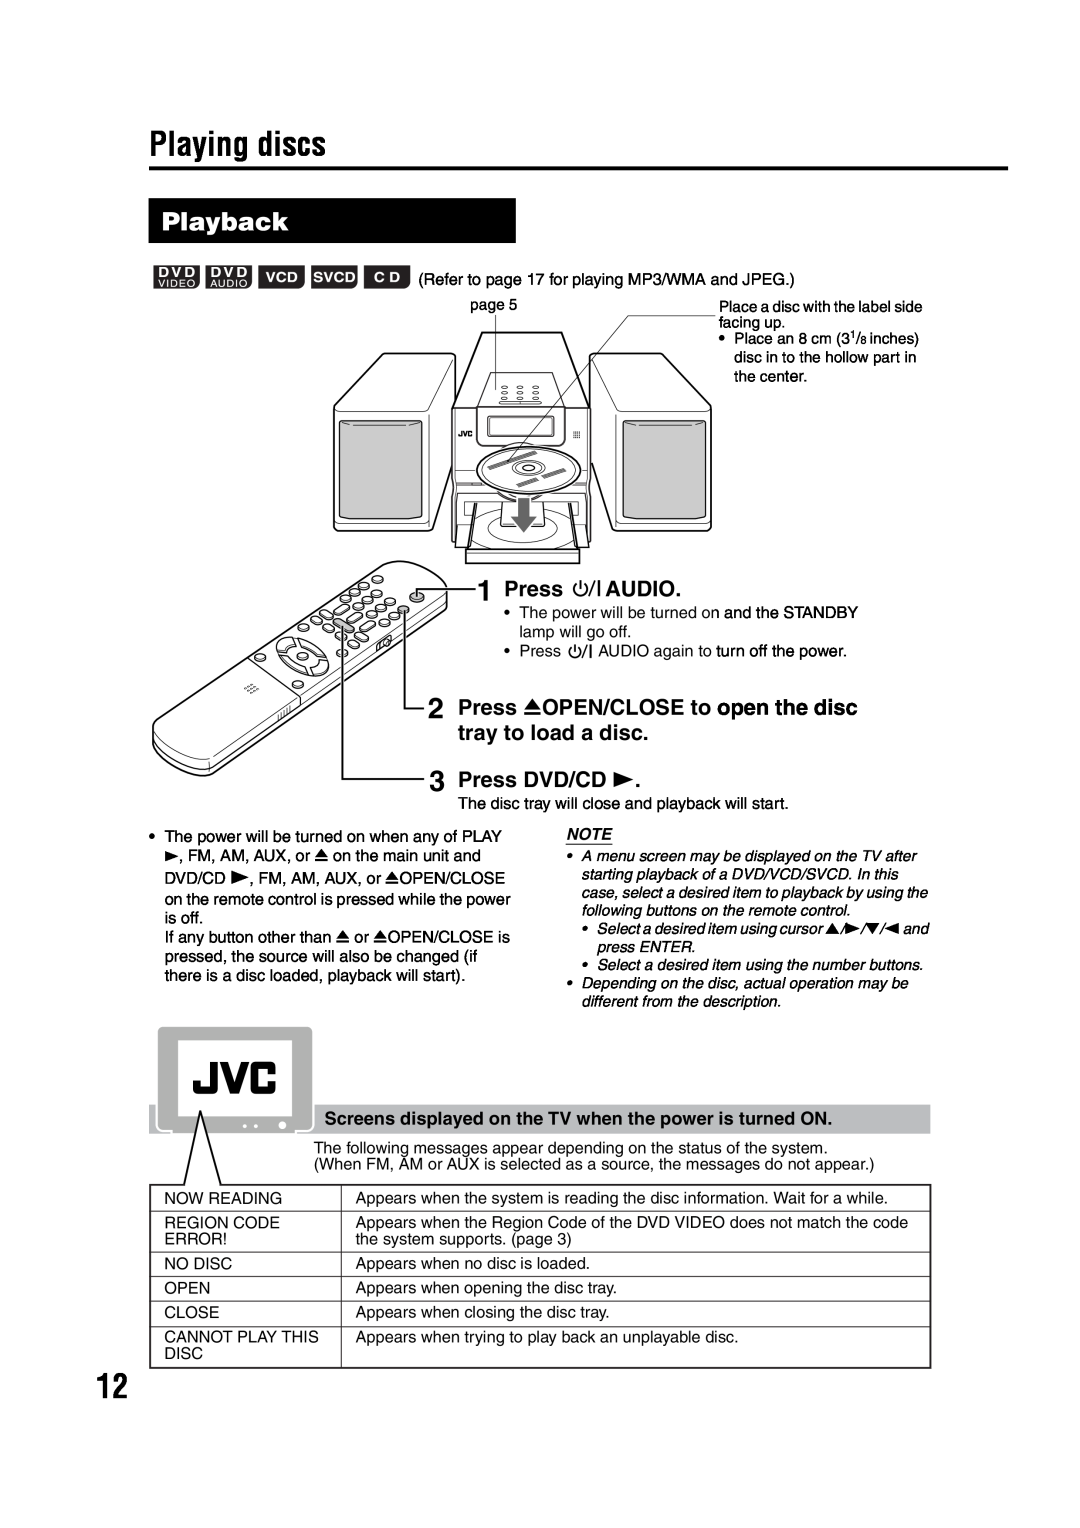 JVC GVT0142-001A Playing discs, Playback, Audio, Press 0OPEN/CLOSE to open the disc, tray to load a disc, Press DVD/CD 